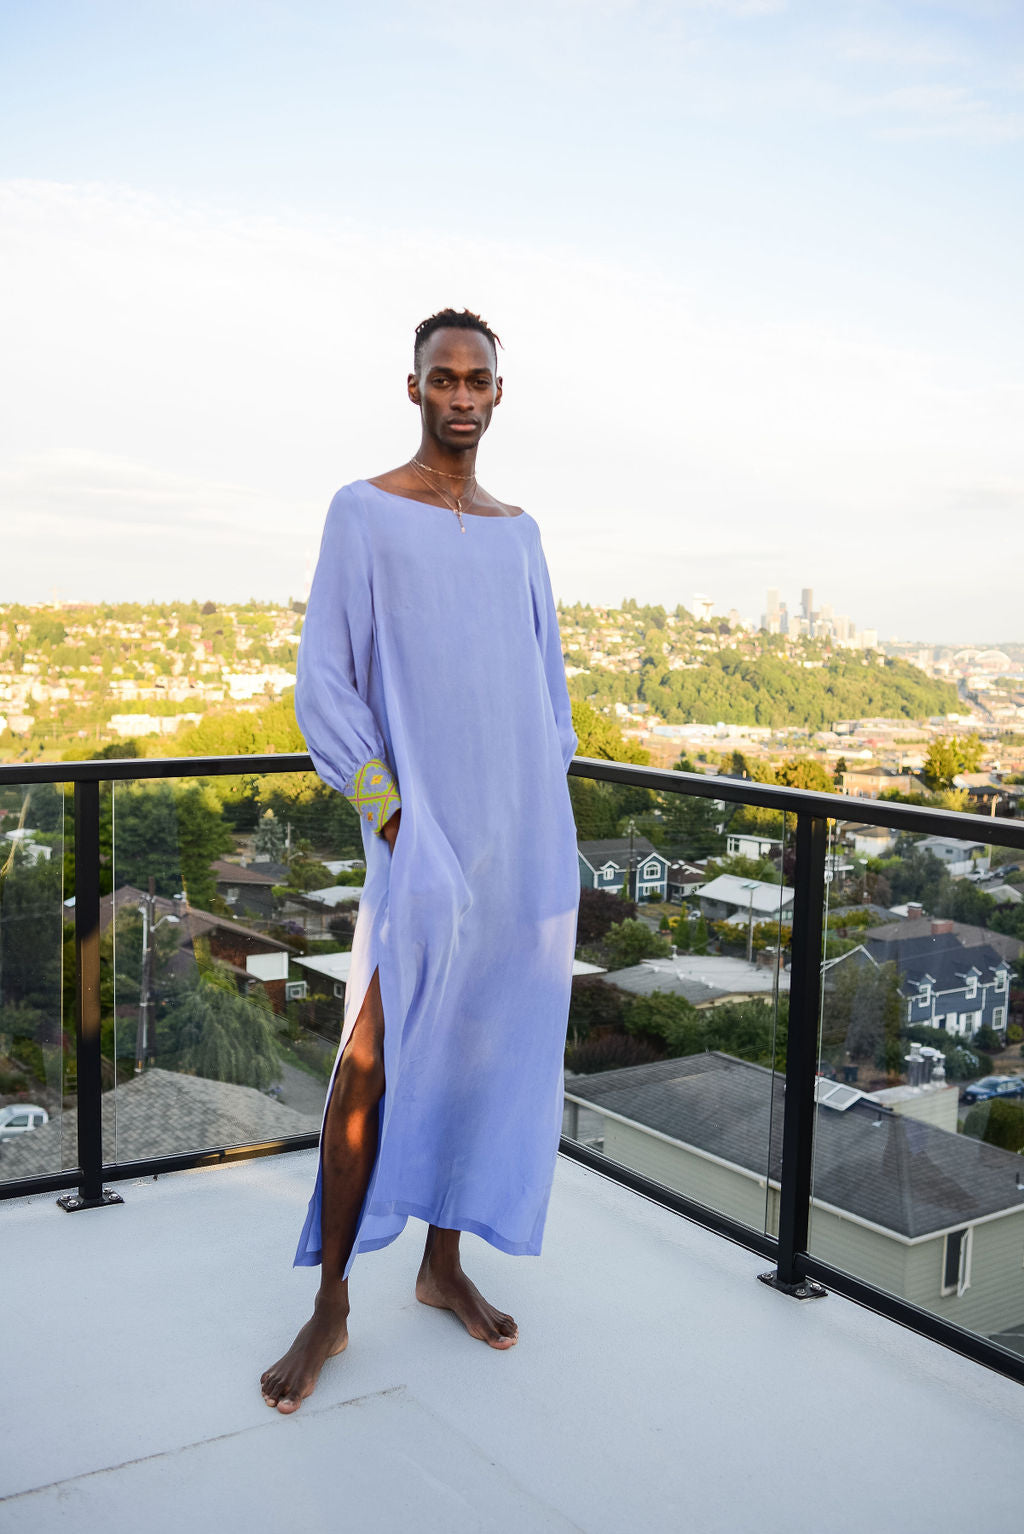 man modelling wearing lavender kaftan duster with embroidered sleeves made from recycled materials 4